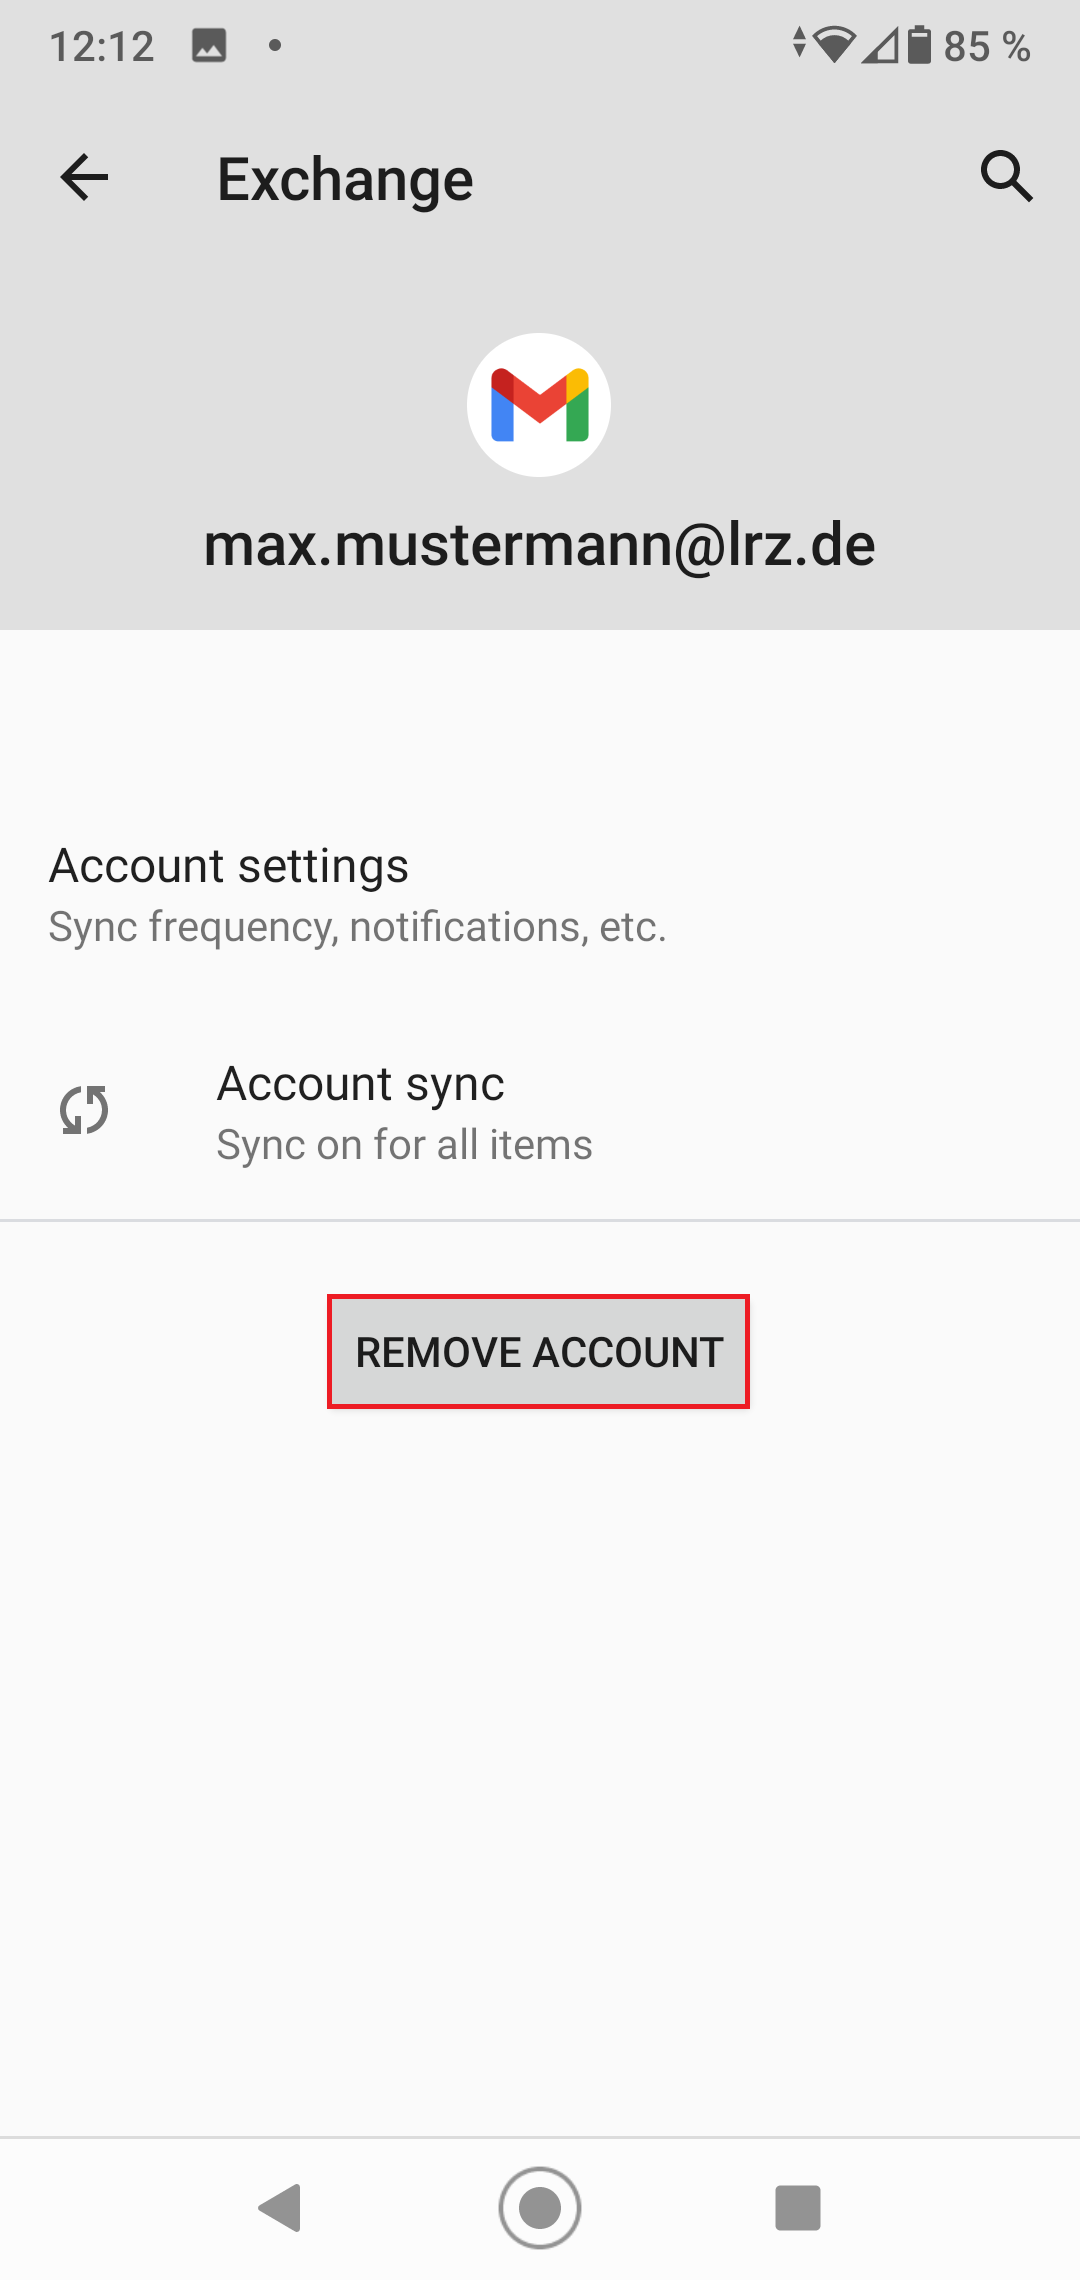 Left arrow for back, Exchange. Gmal logo. max.mustermann AT lrz.de. Account settings. Icon Refresh, Sync frequency, notifications, etc. Account sync, Sync an for all items. Selected button Remove Account. 